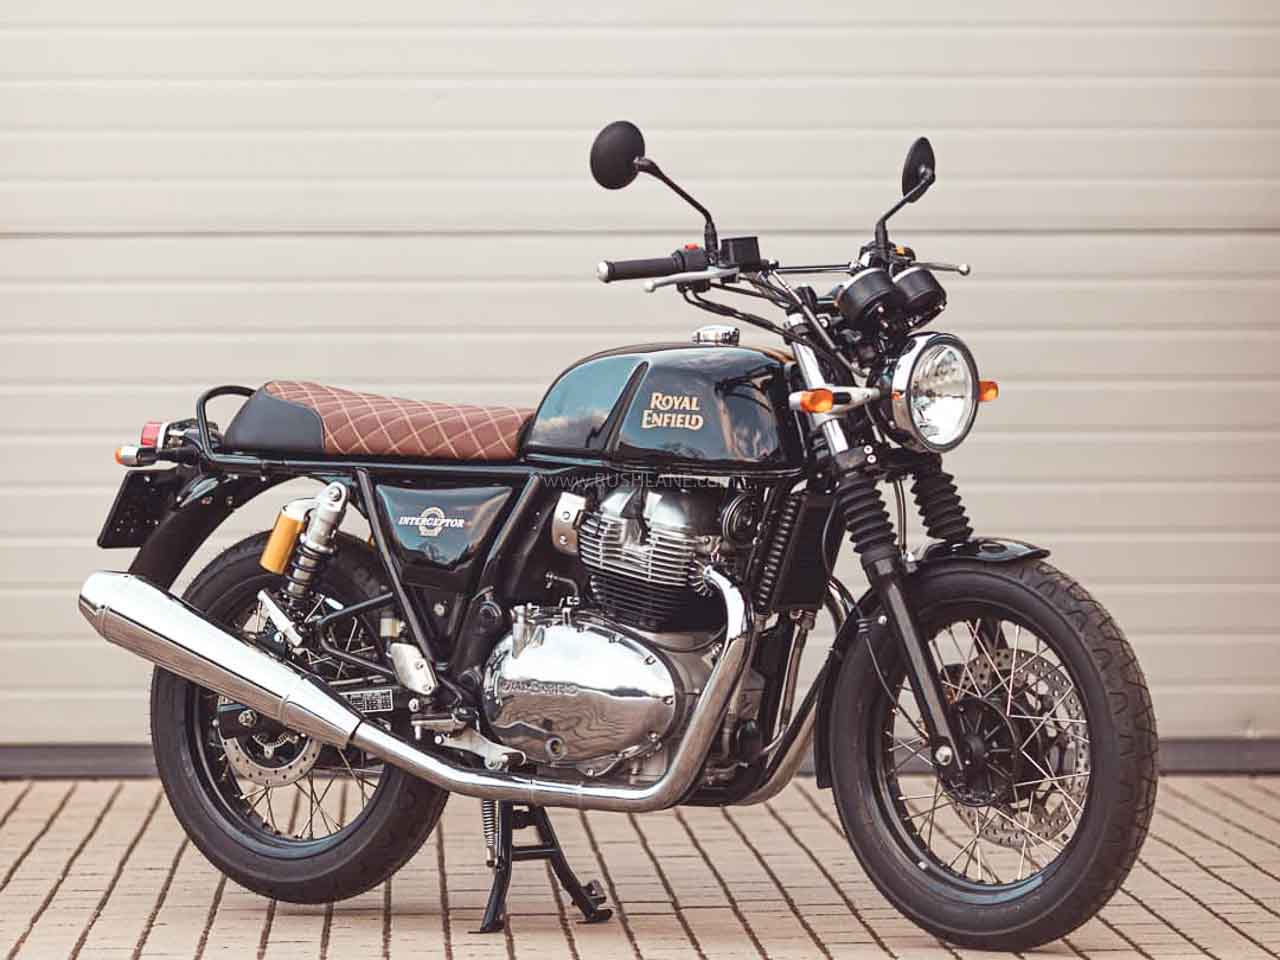 Royal Enfield Classic 350, 650 Twins Sales Decline Ahead Of New Launch